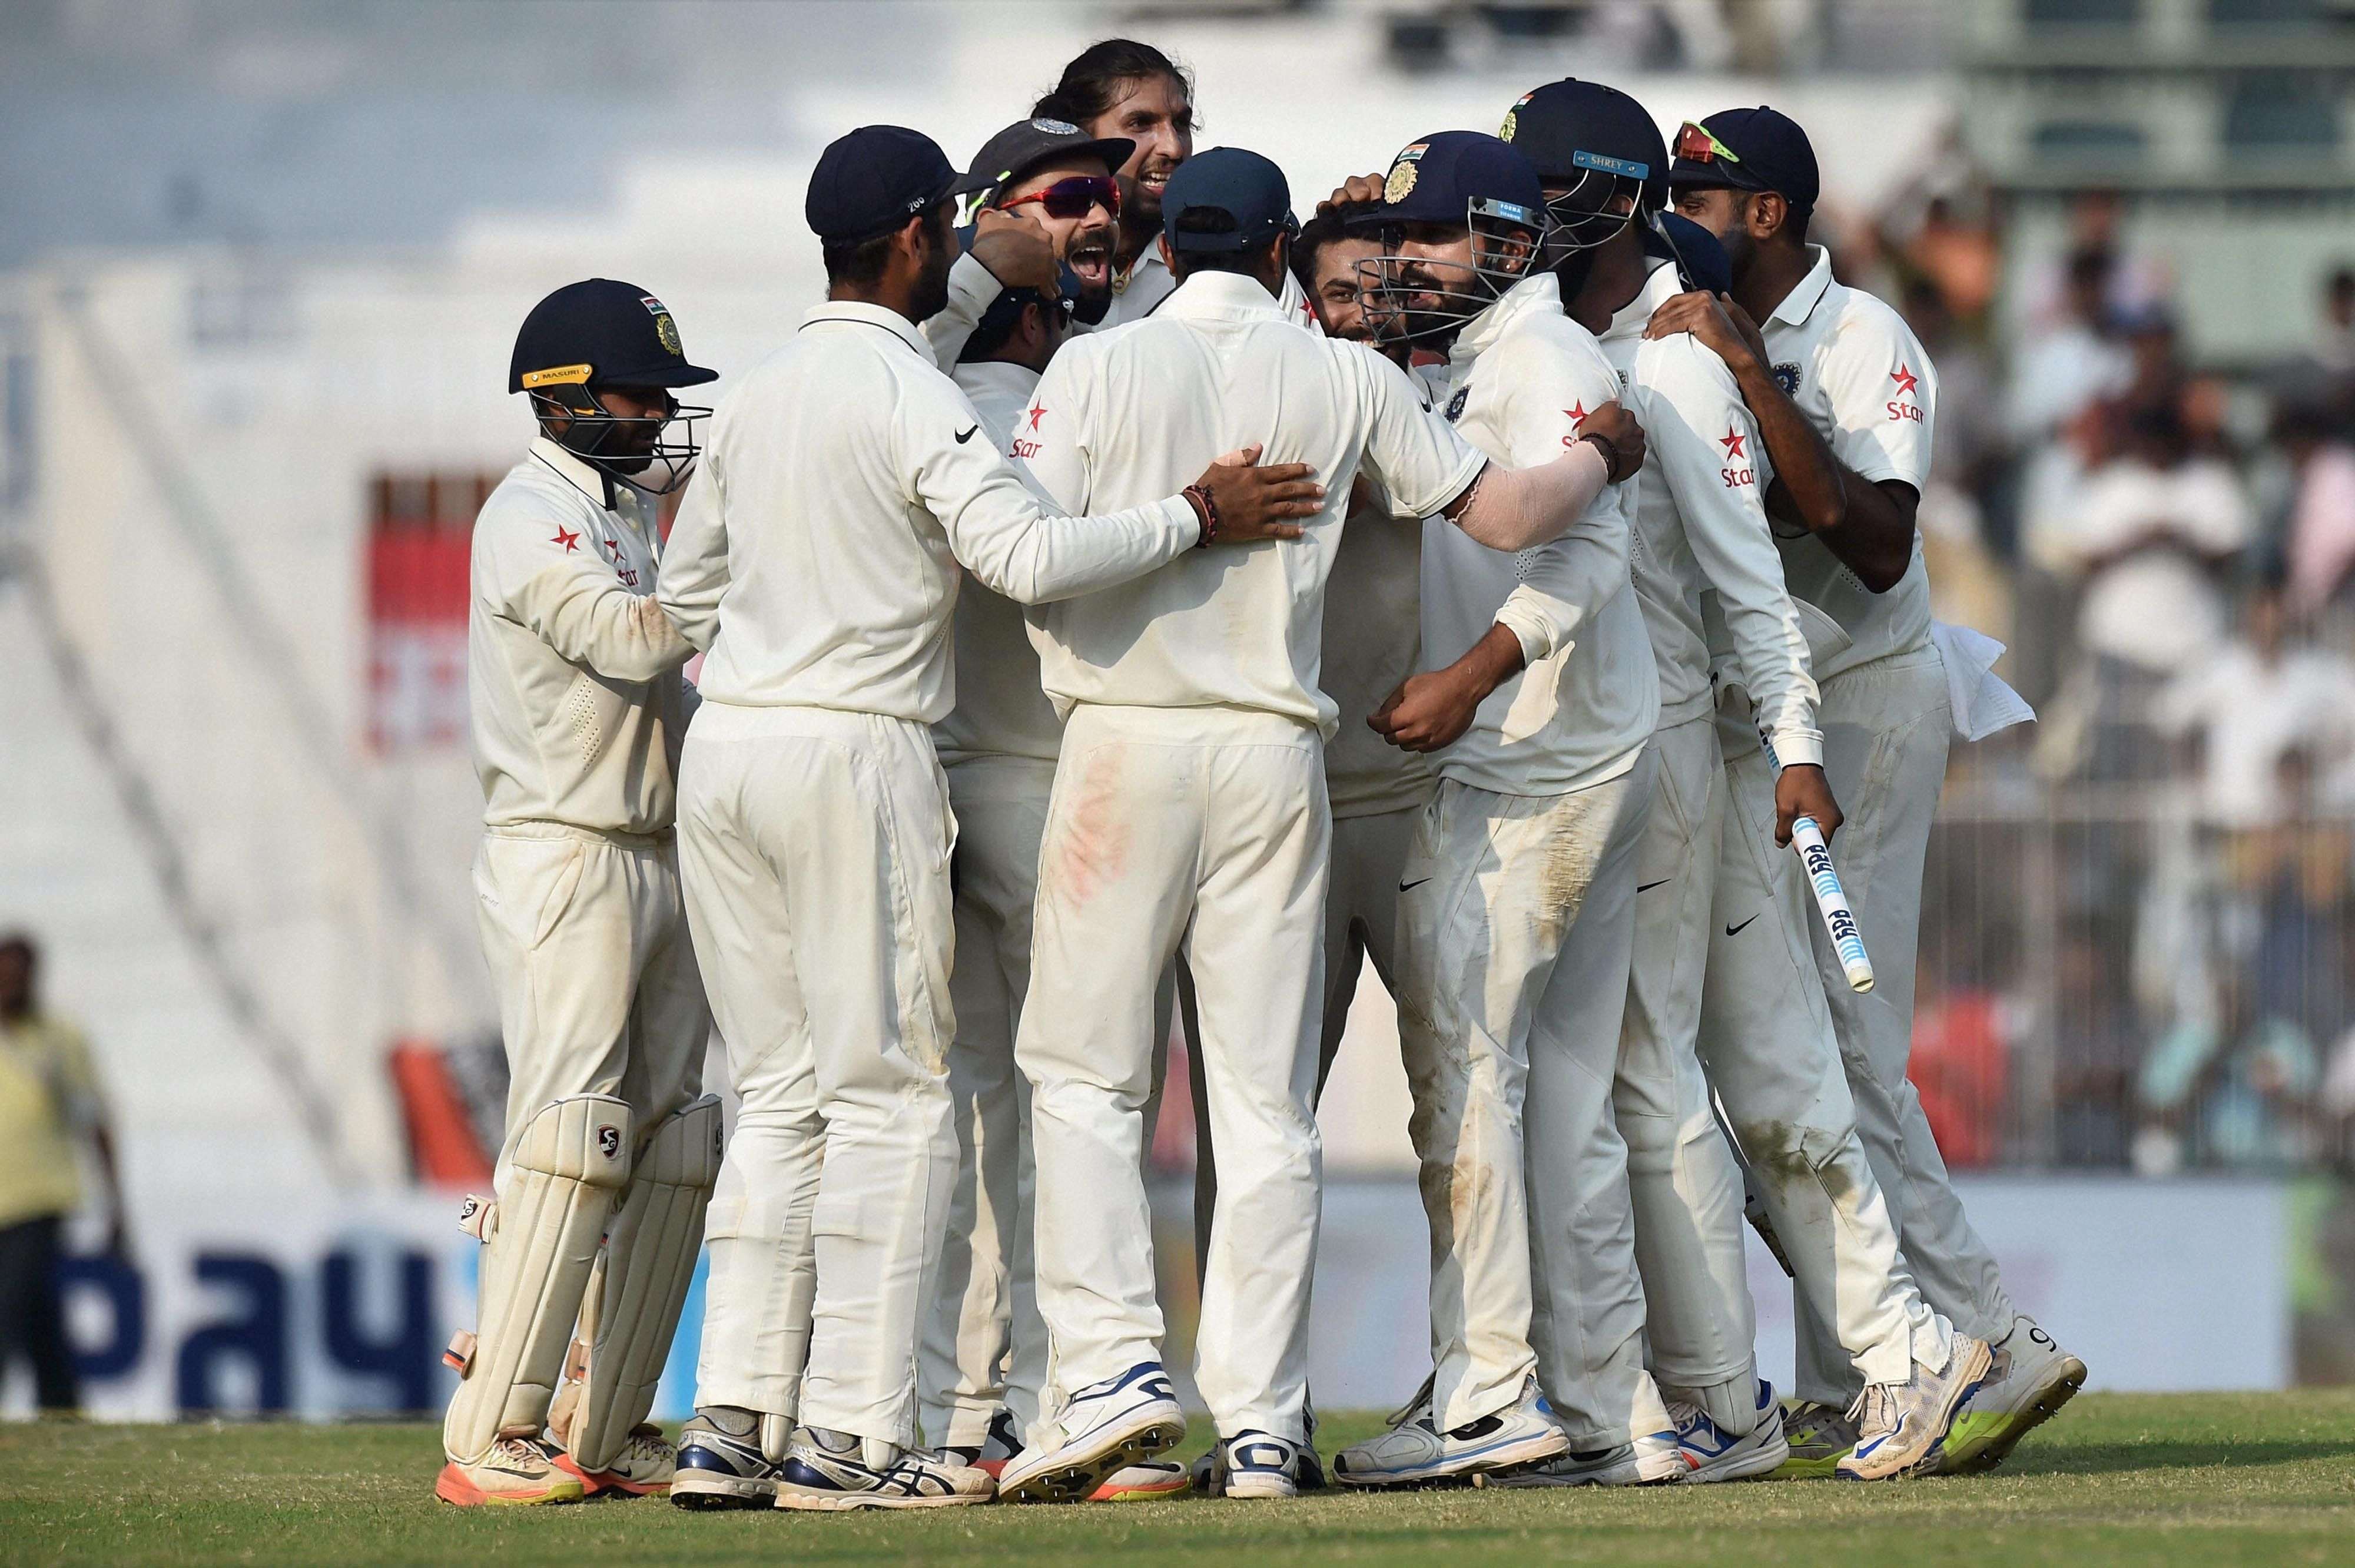 Chennai: Indian cricket team celebrates after registering 4-0 test series win against England, at MAC Stadium in Chennai on Tuesday. PTI Photo by R Senthil Kumar(PTI12_20_2016_000272B)